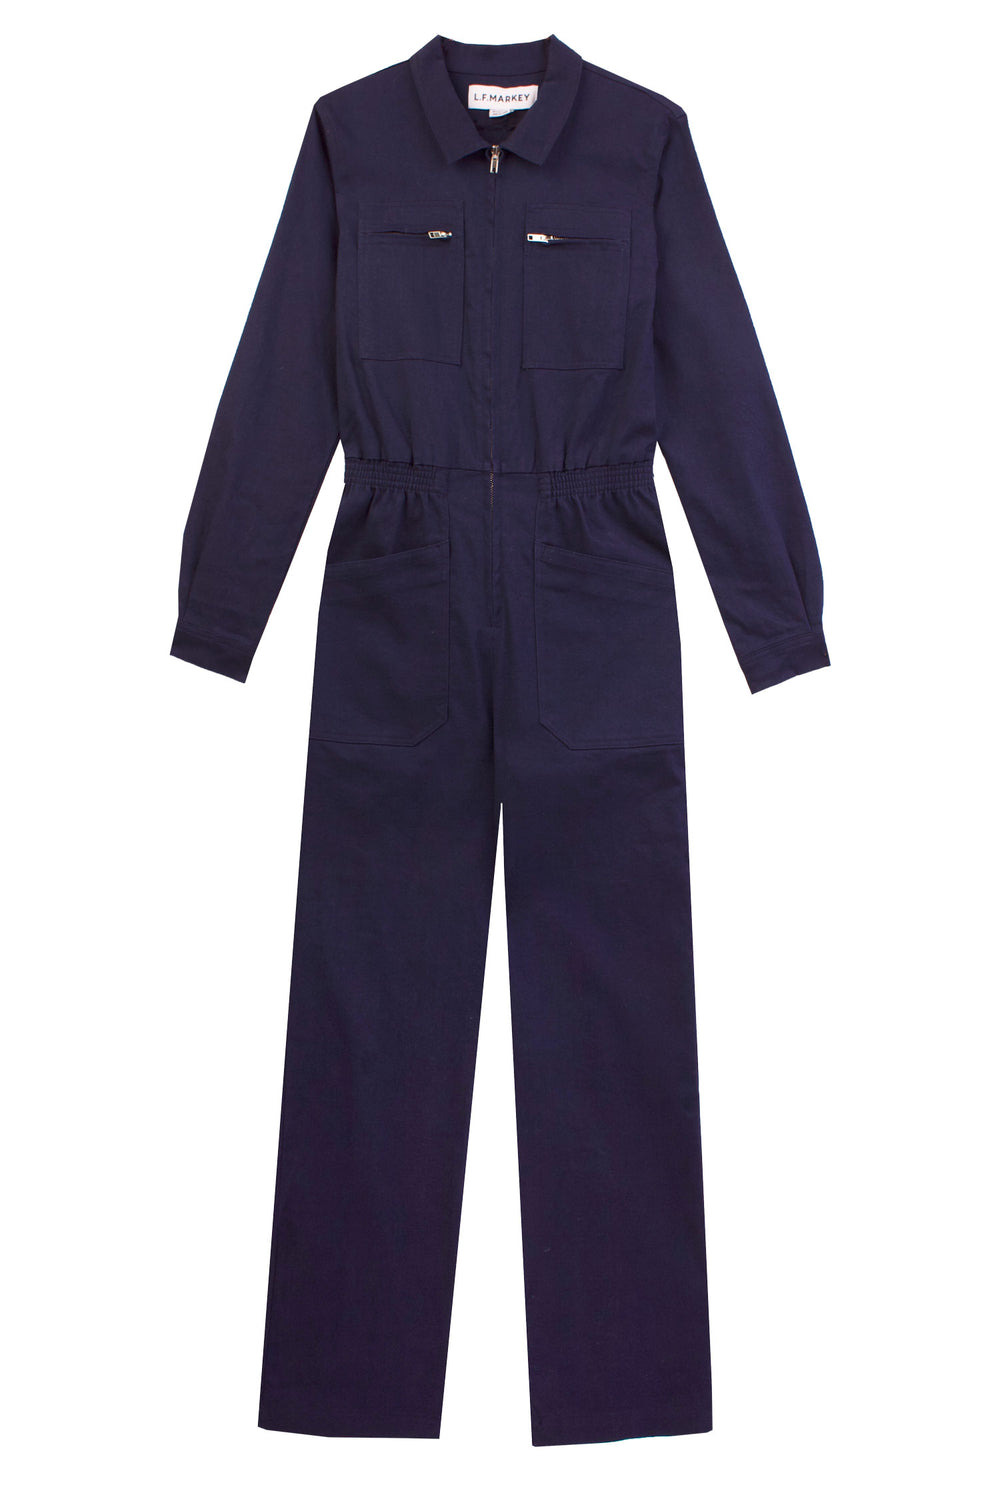 Danny Stretch Drill Boilersuit Navy